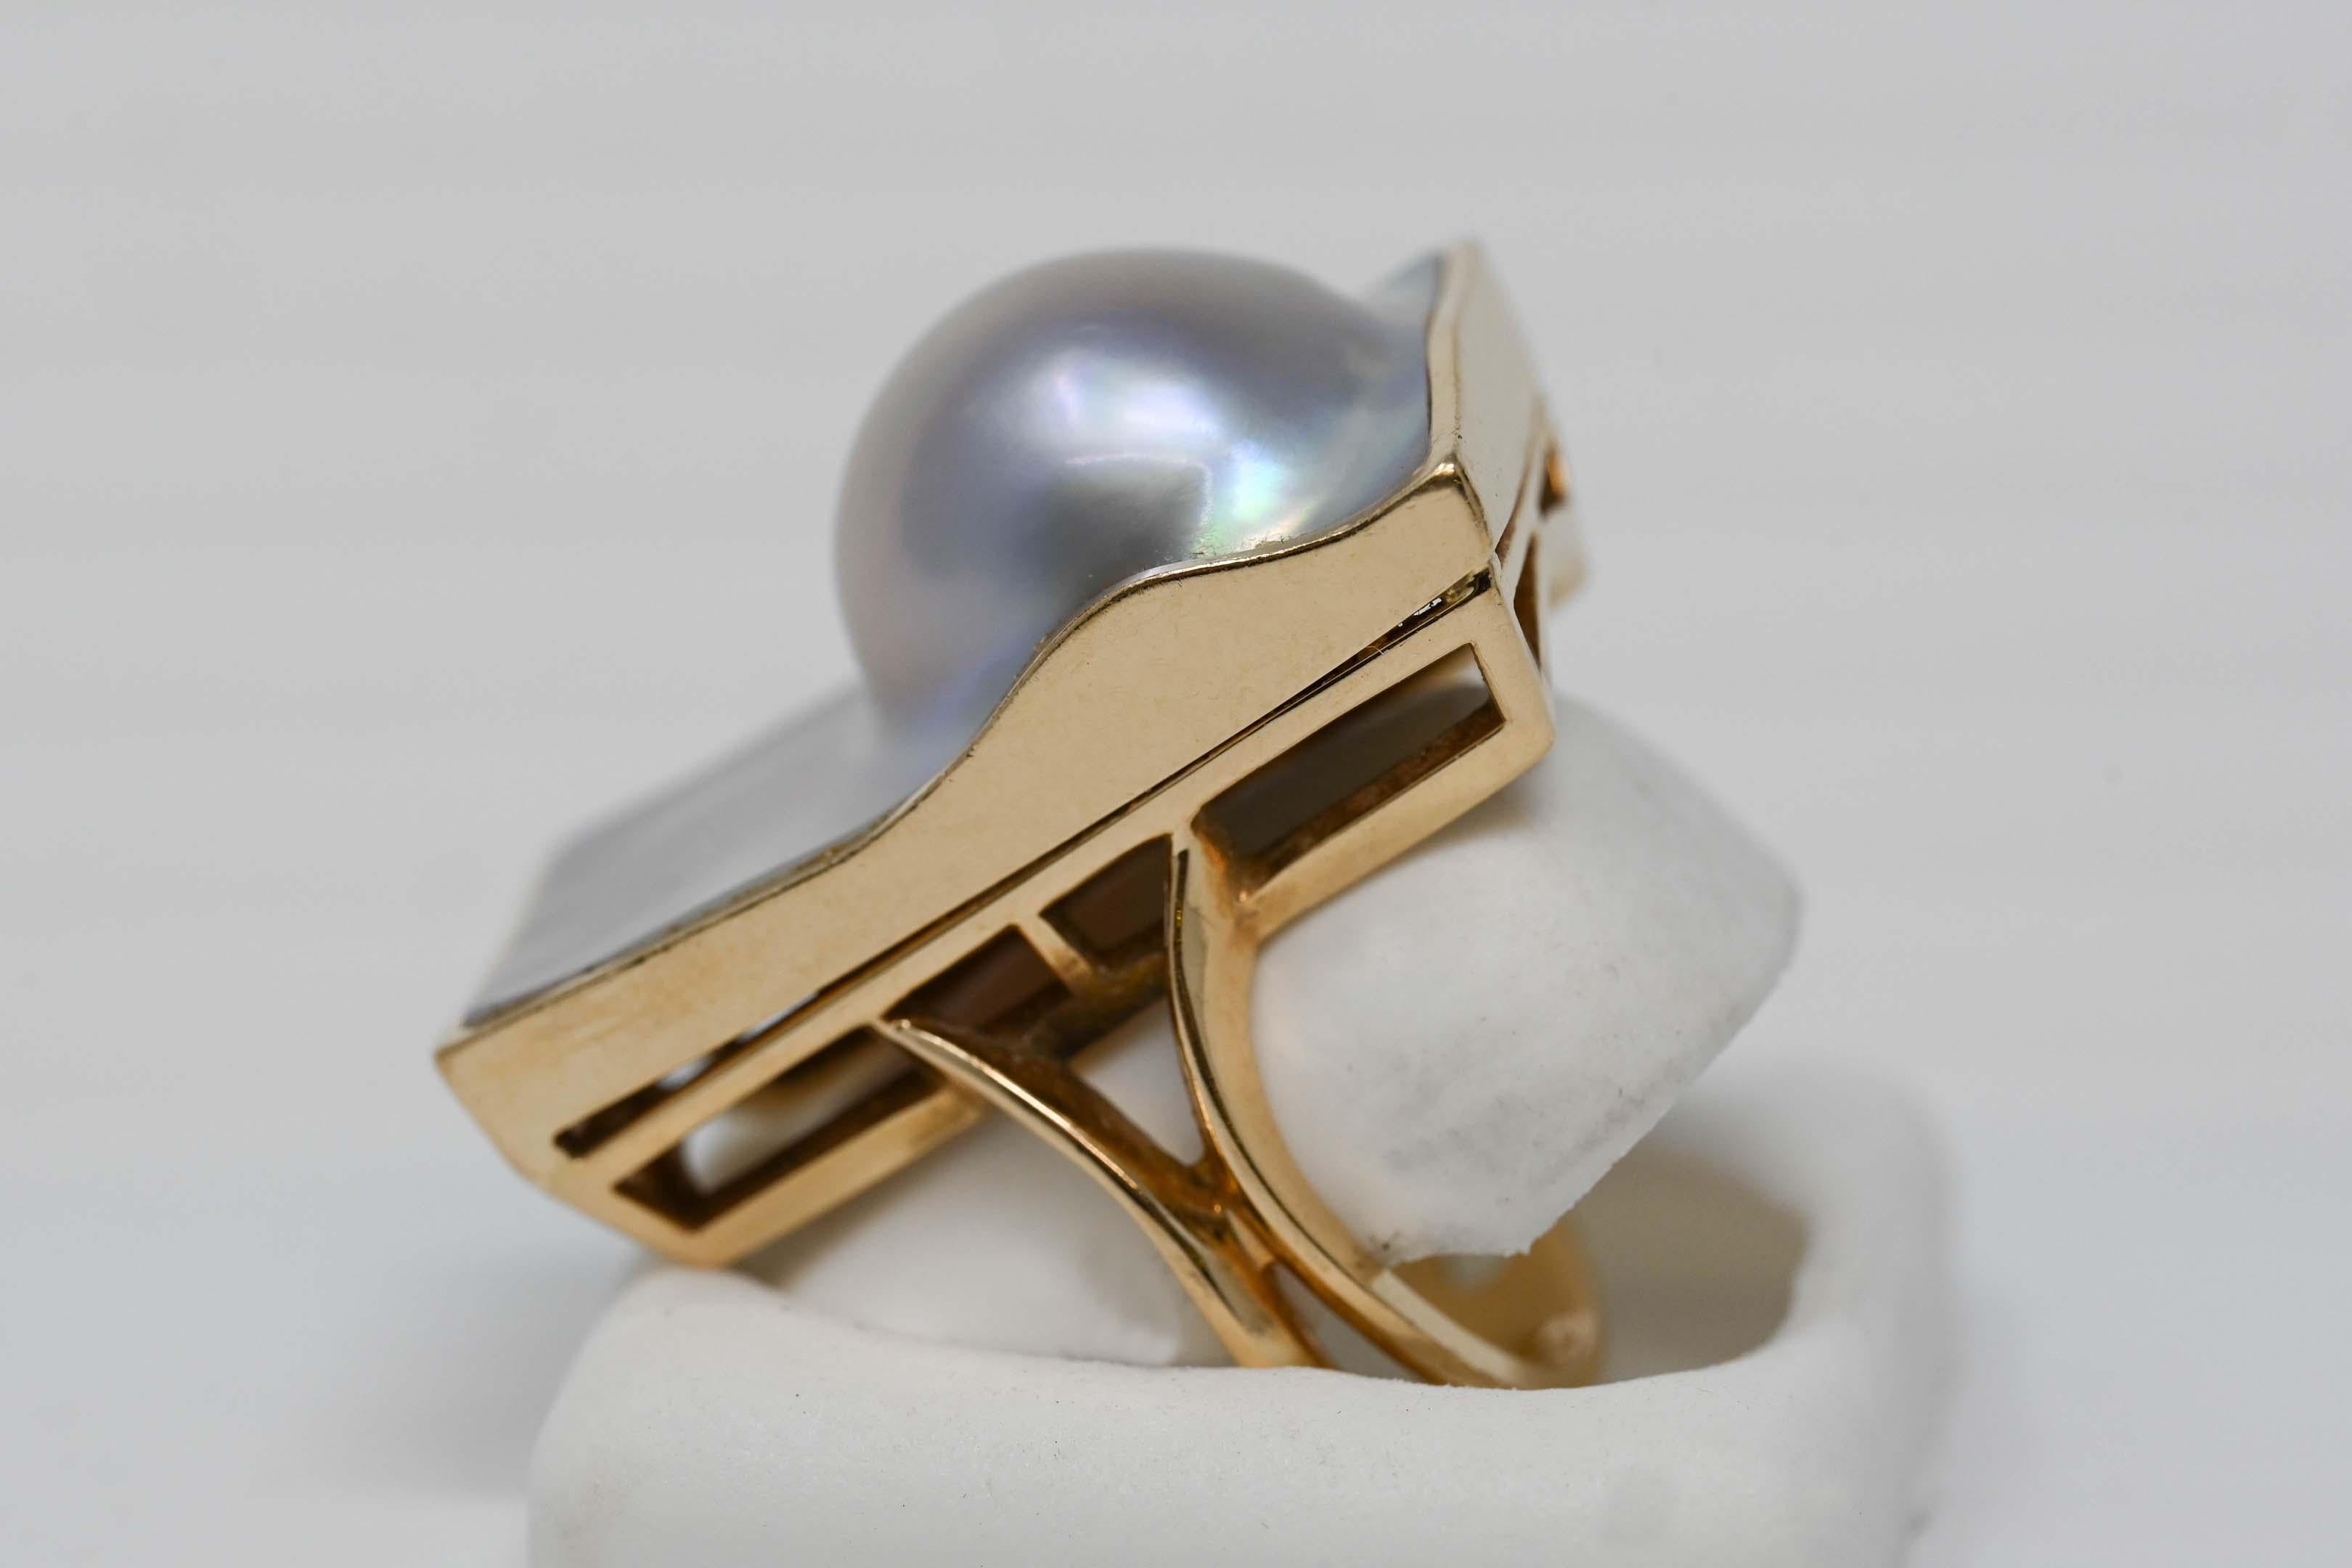 14k vintage ring with blister rectangular pearl size 7 1/2 resizable. The pearl measures 32 x 17 mm, stamped 14k maker C.S.C., 17.7 grams. In good condition.
